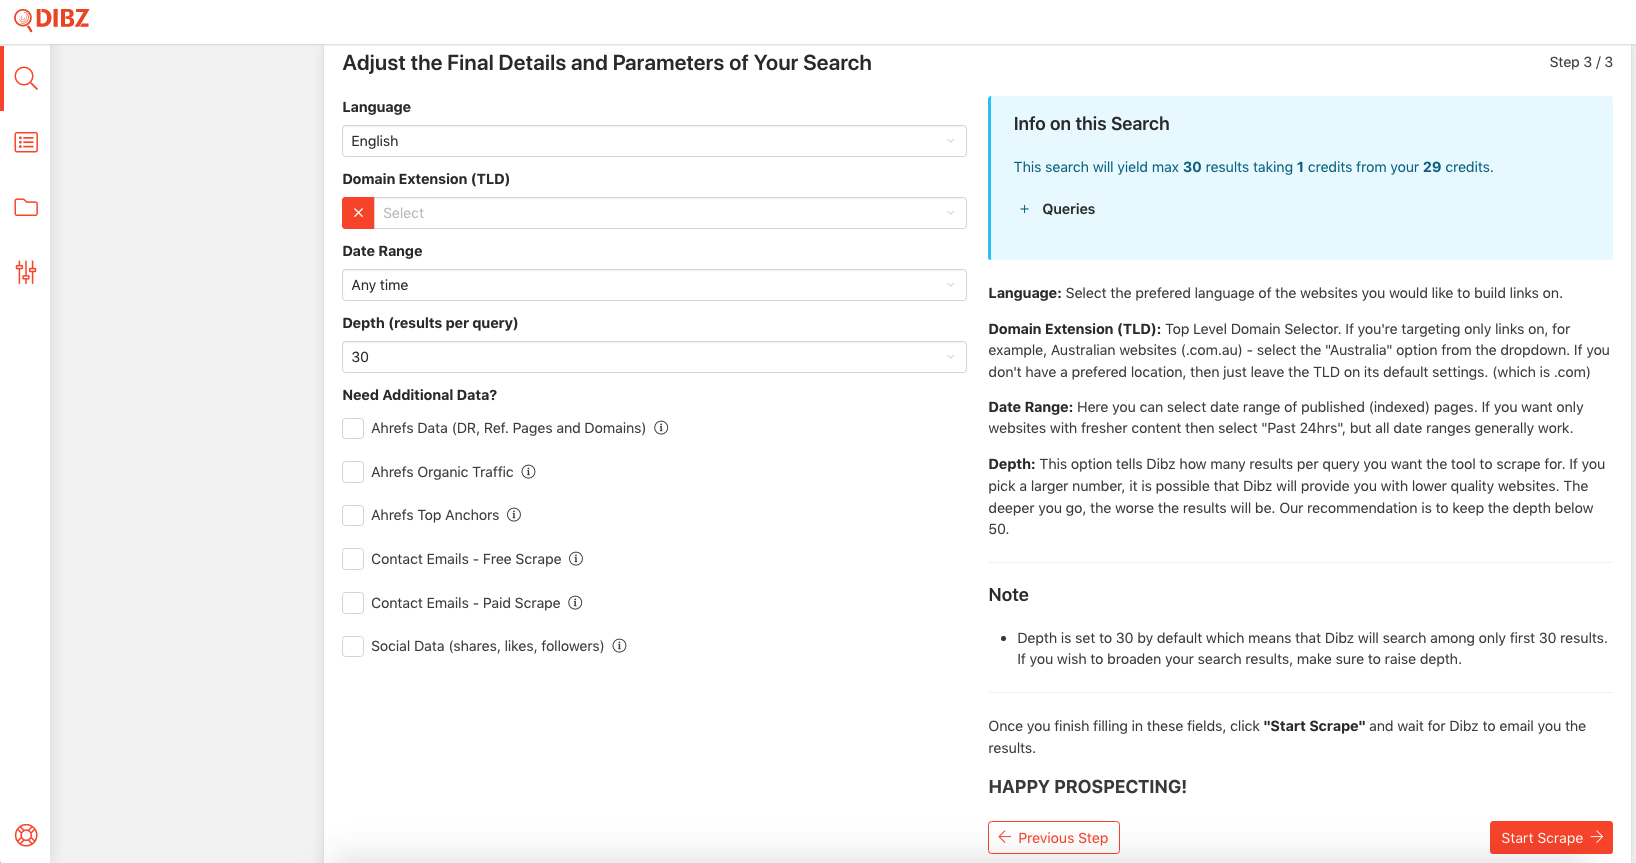 Adjusting the Final Details and Parameters of Your Search